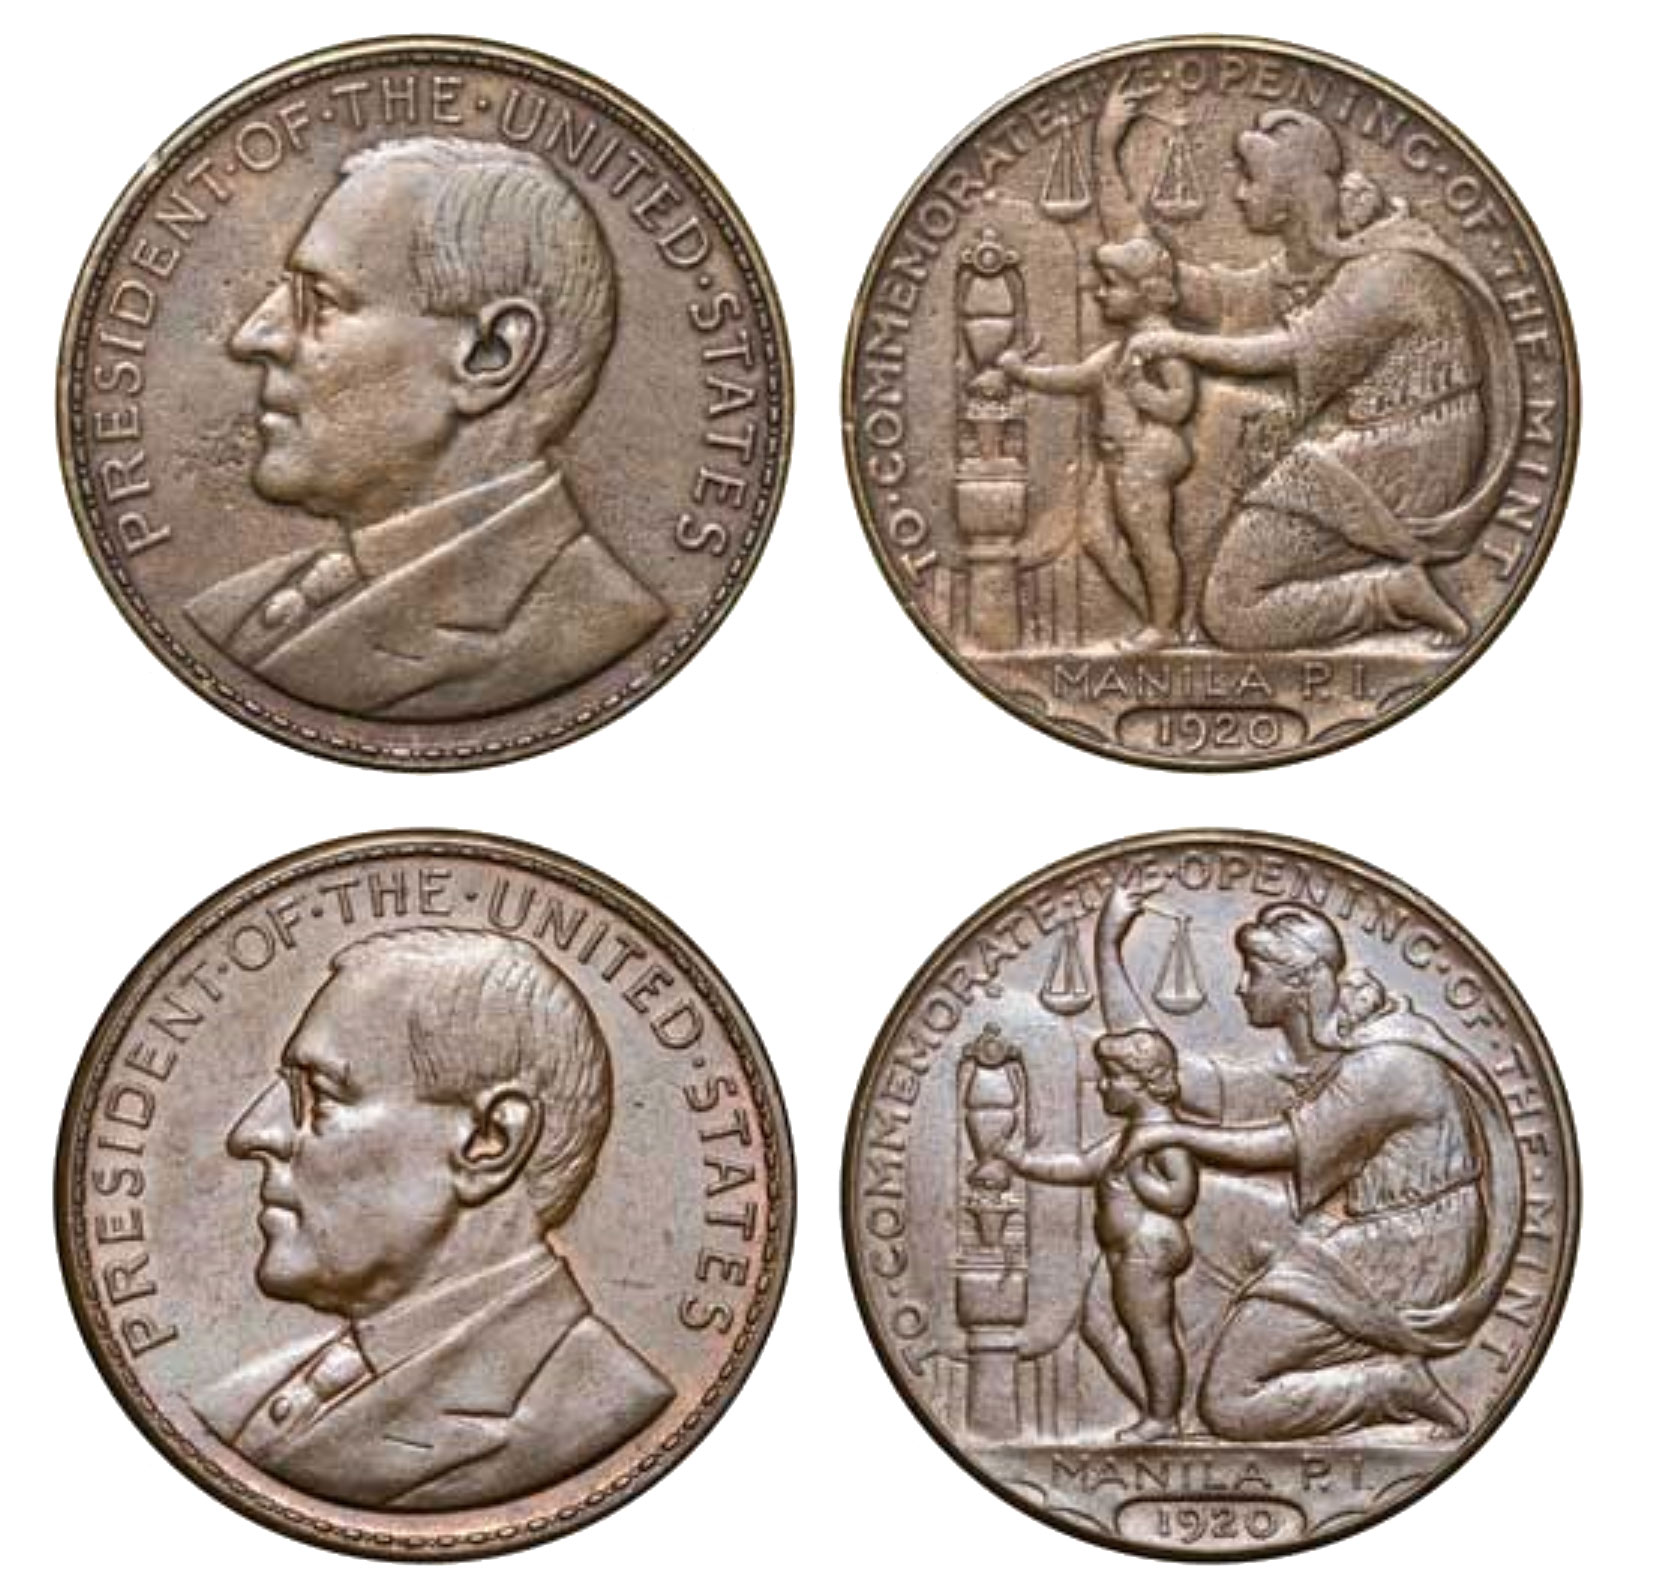 The counterfeit (top) exhibits "mushy" details and pitted surfaces. Genuine pieces exposed to saltwater damage should still exhibit hints of mint luster in the recesses.